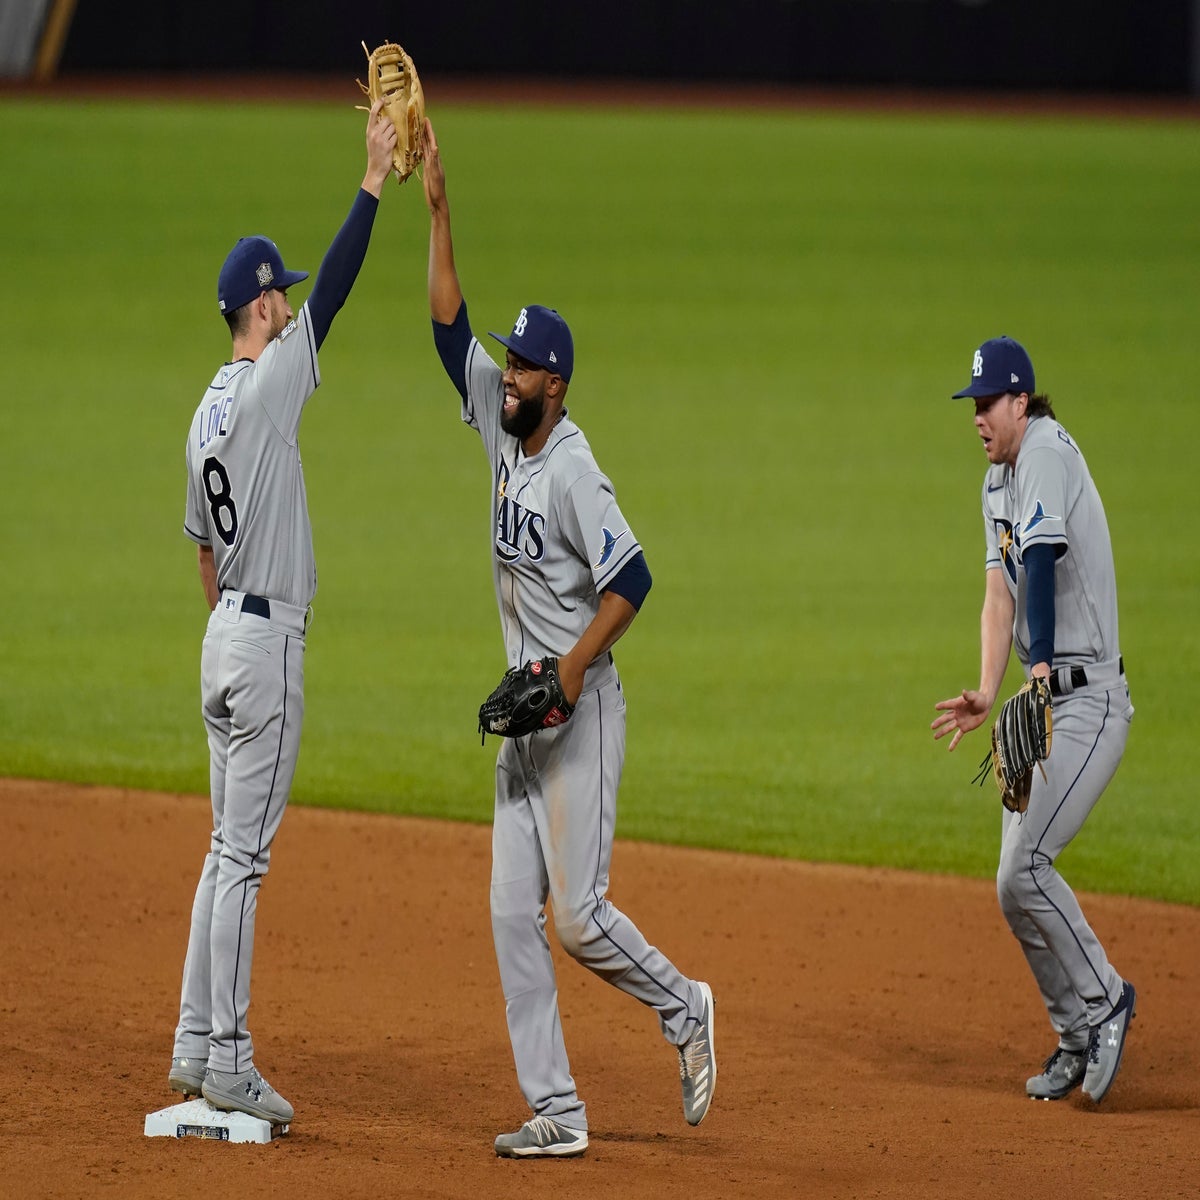 Tampa Bay Rays - Coming to tonight's game? Reminder that fans will